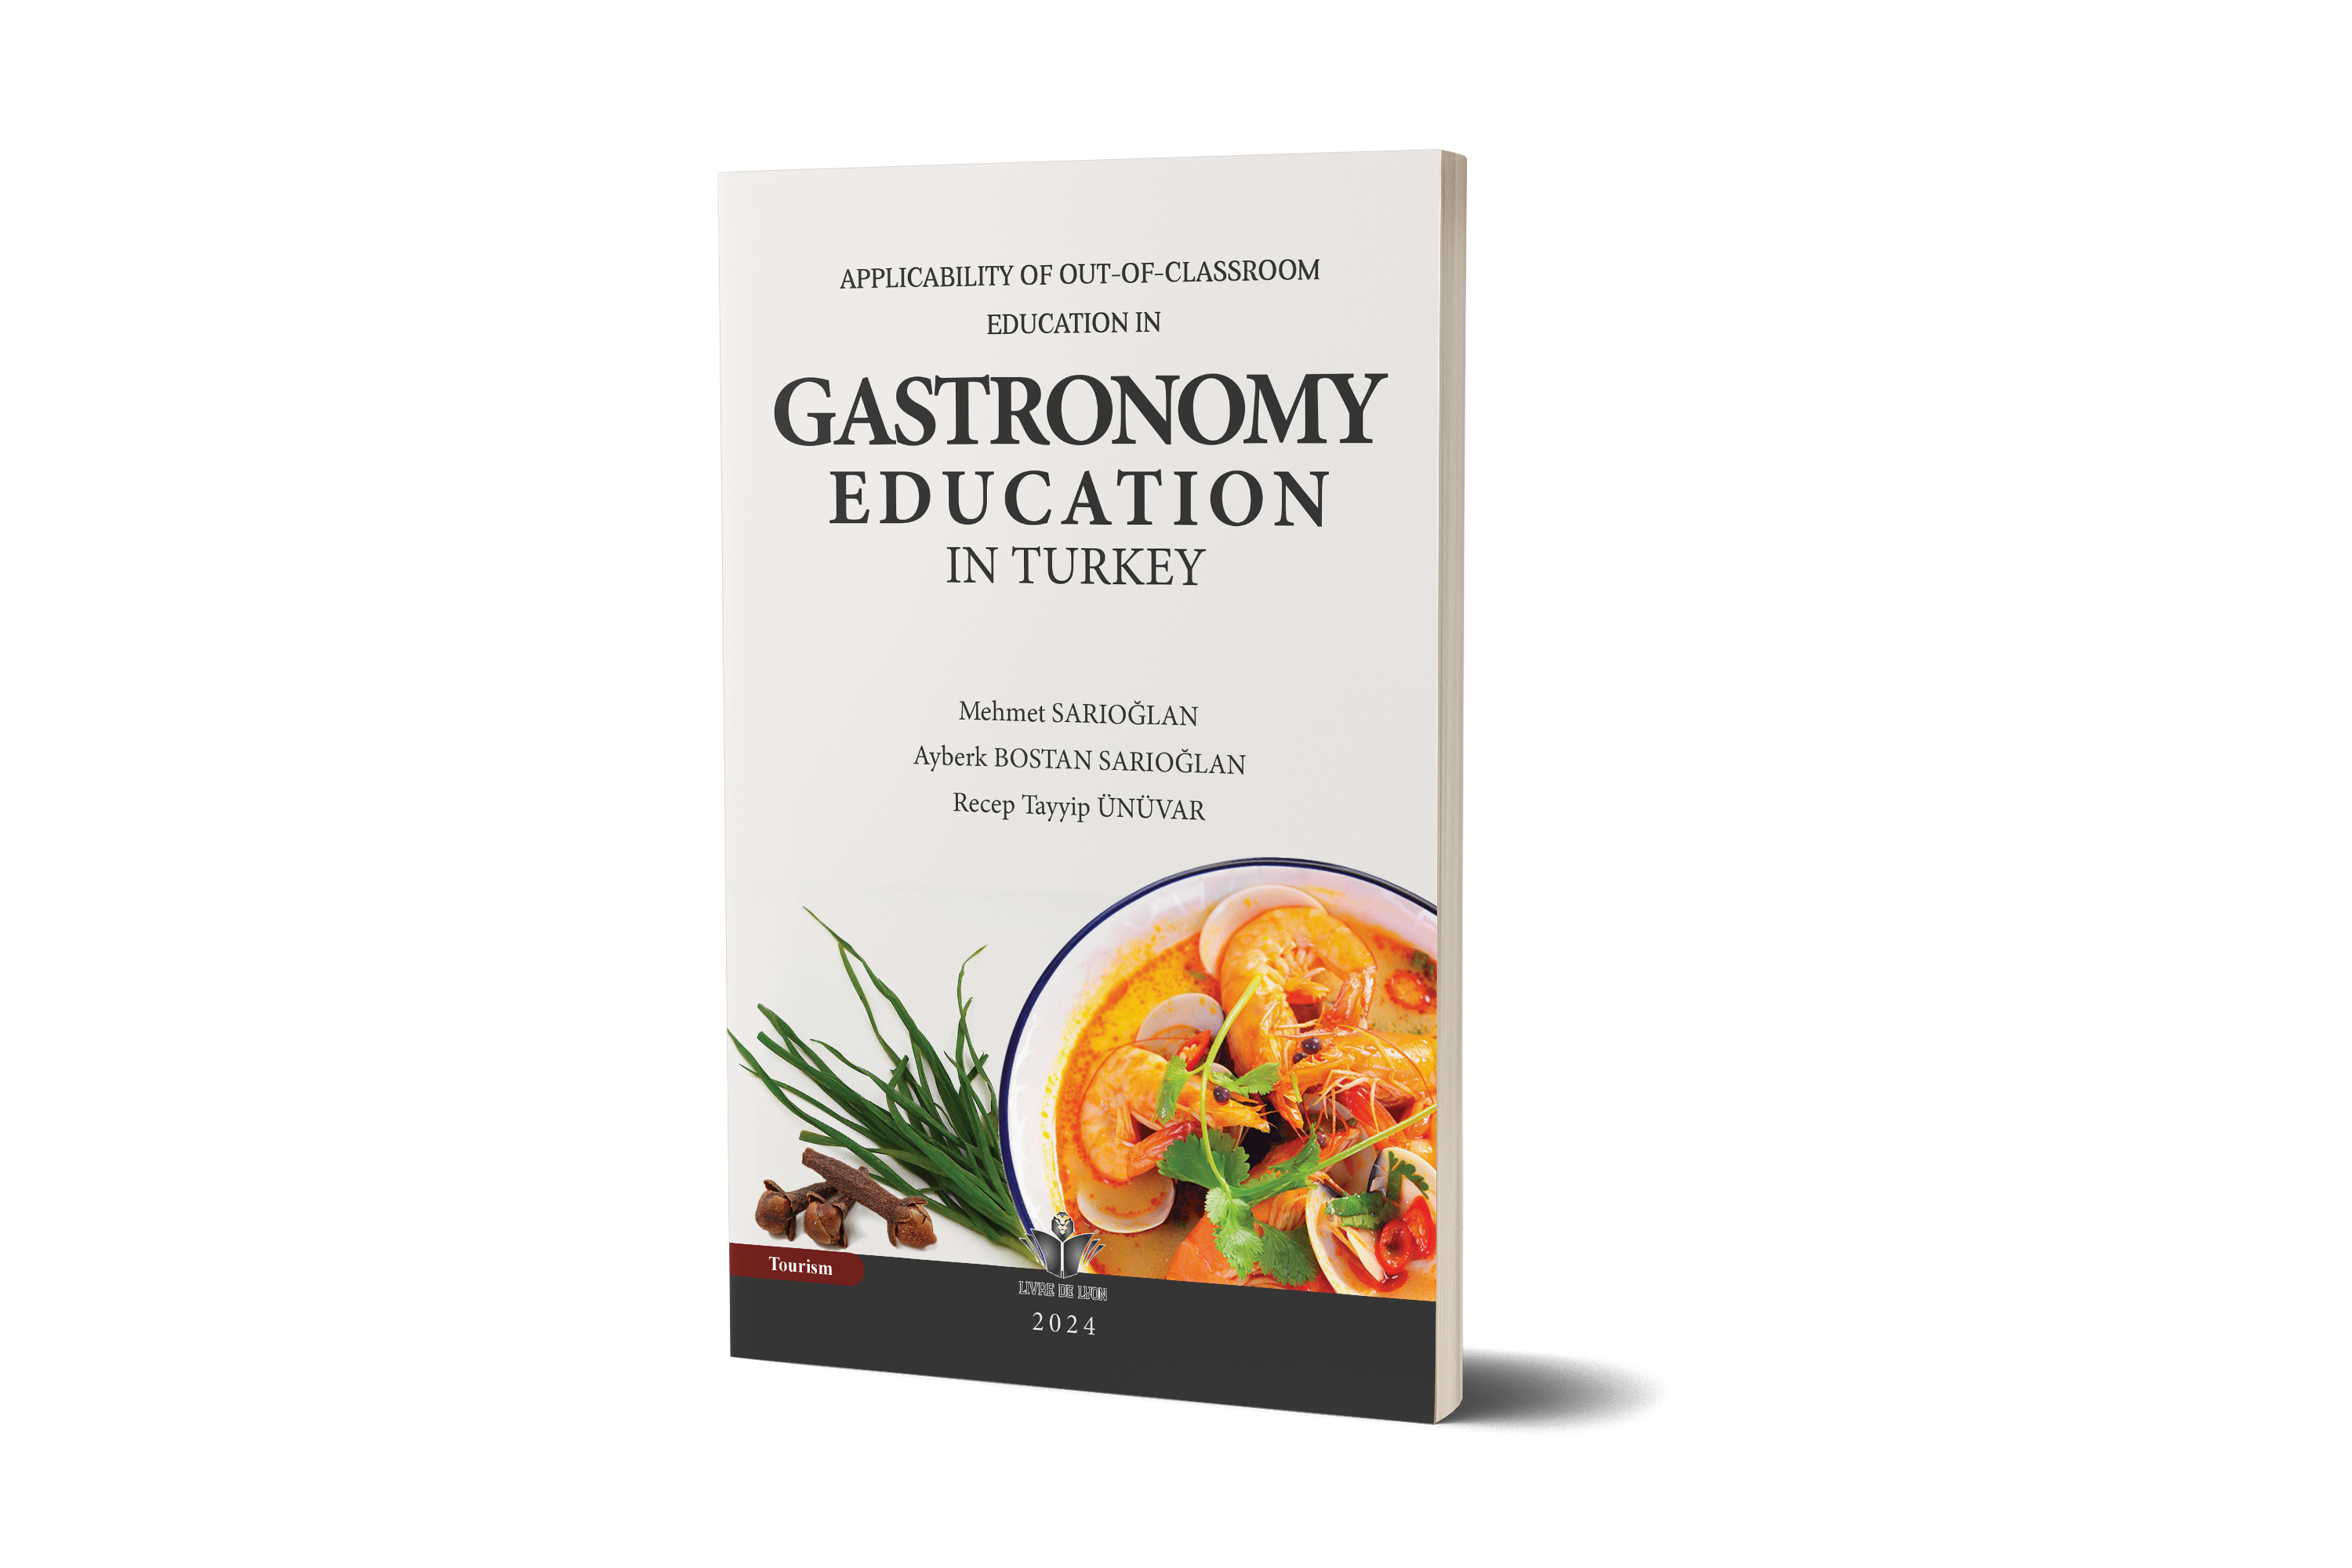 Applicability of Out-of-Classroom Education in Gastronomy Education in Turkey